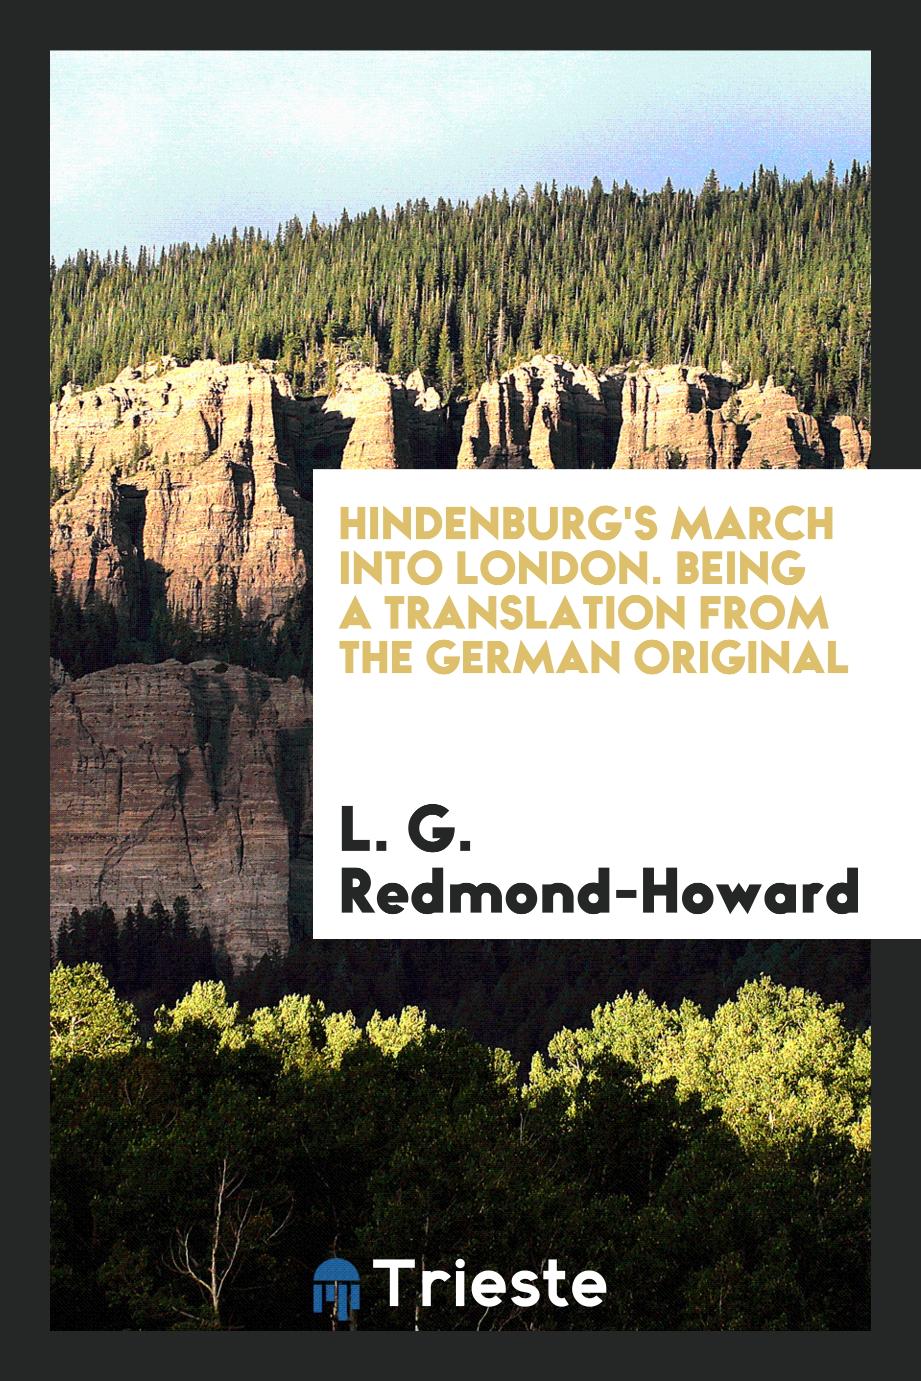 Hindenburg's march into London. Being a translation from the German original